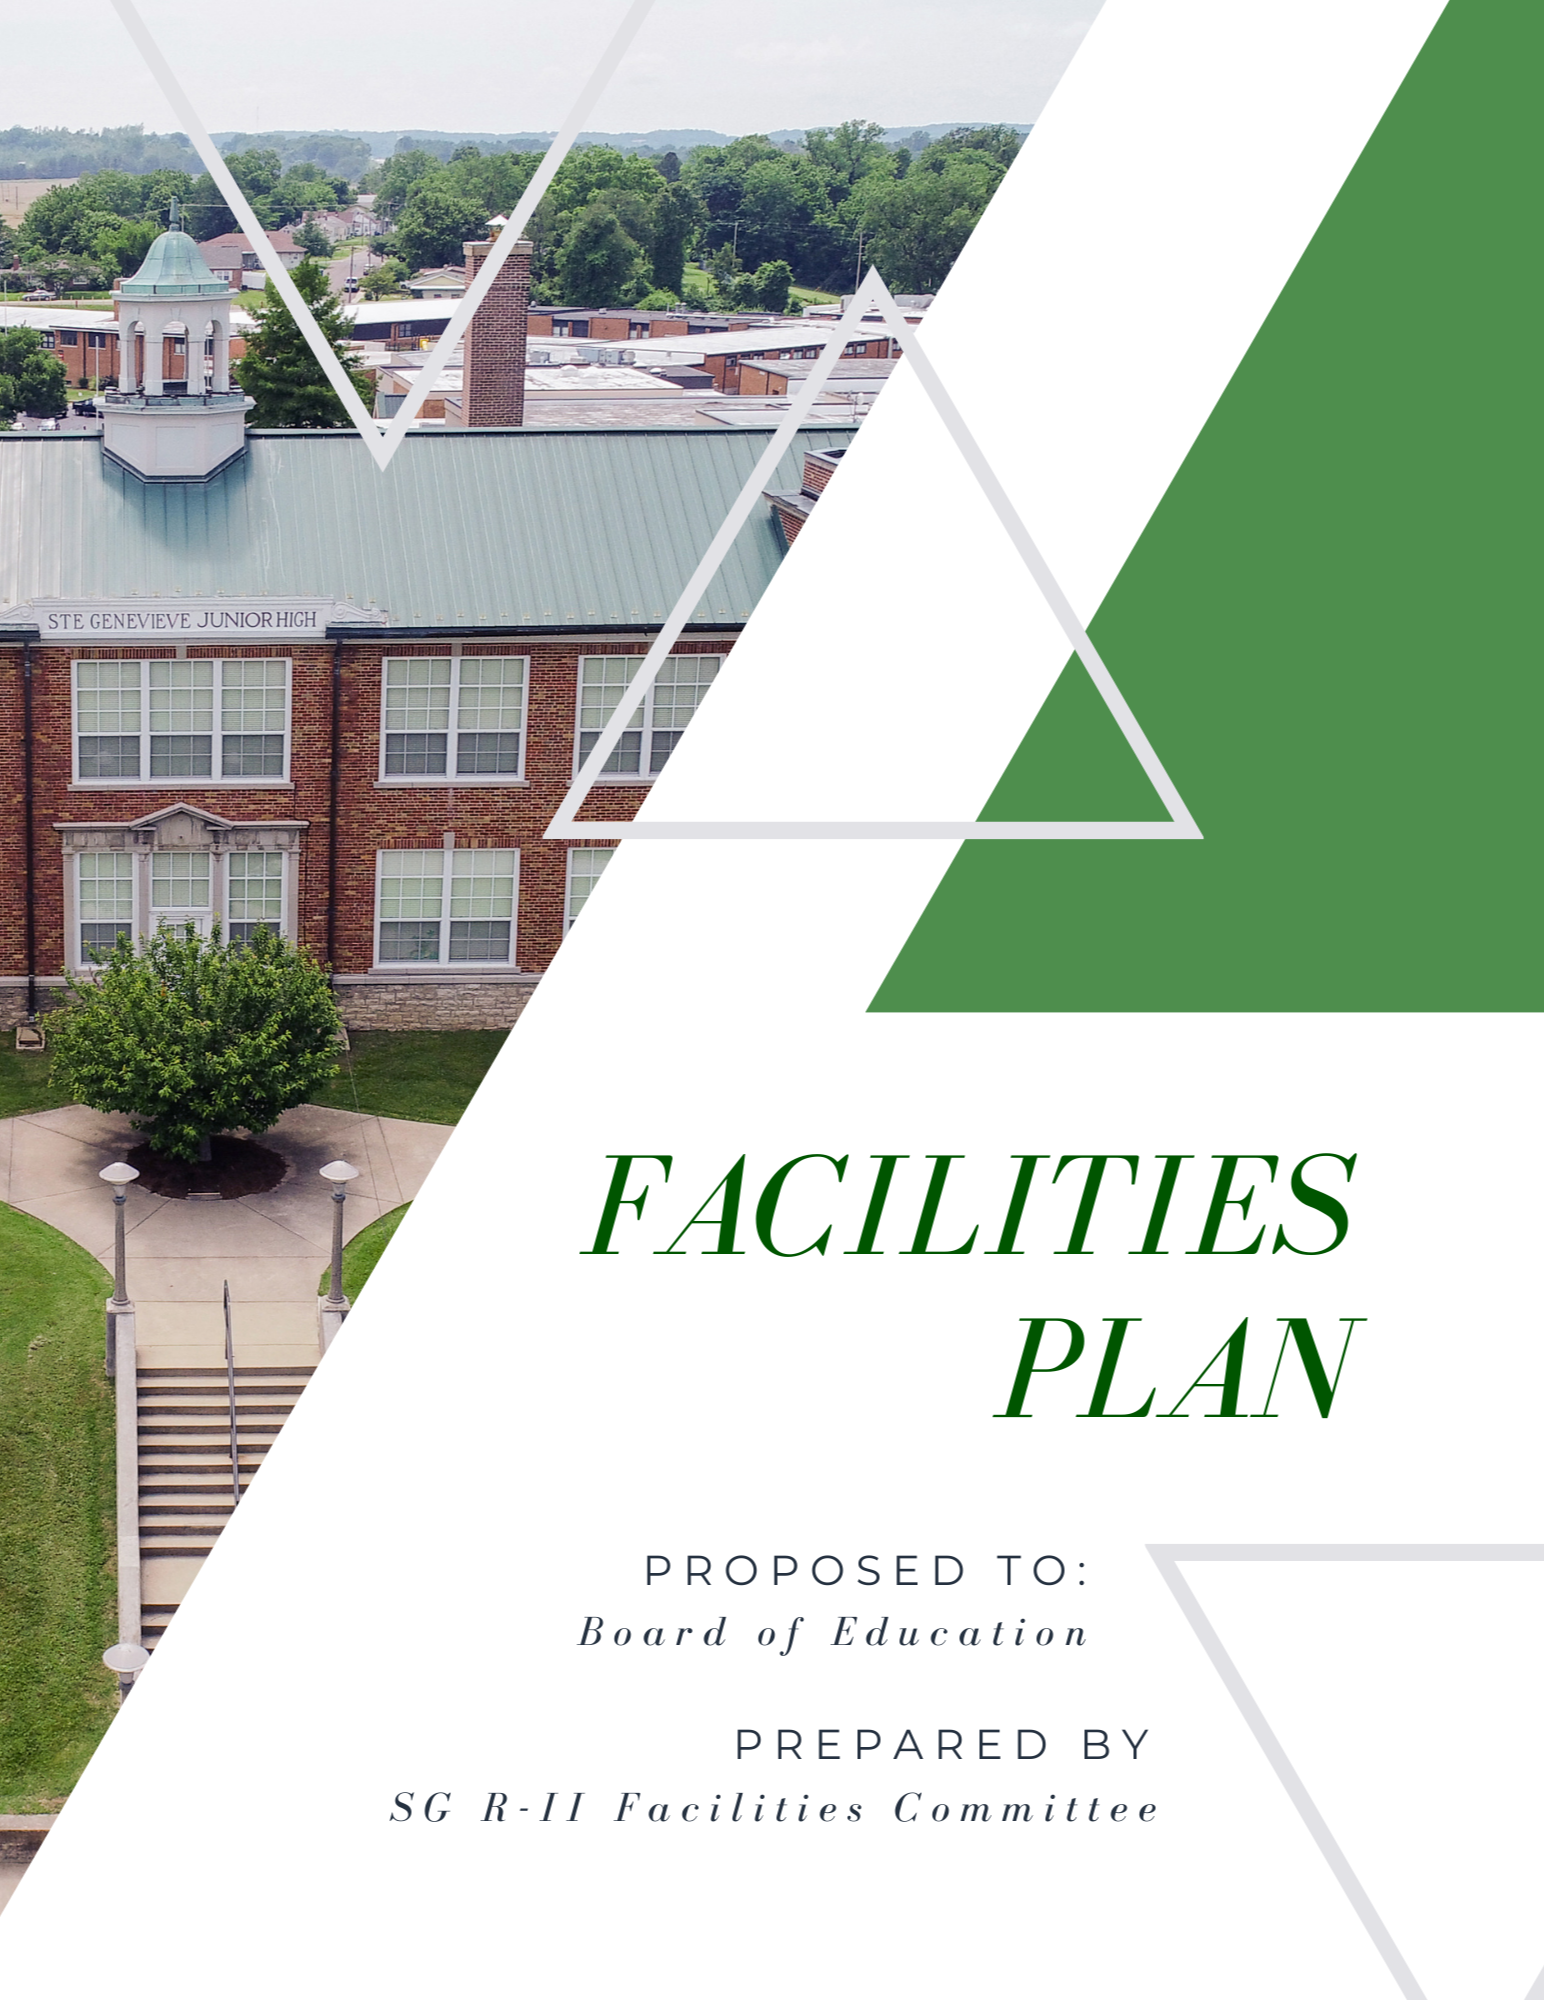 Photo of the cover of the Facilities Plan